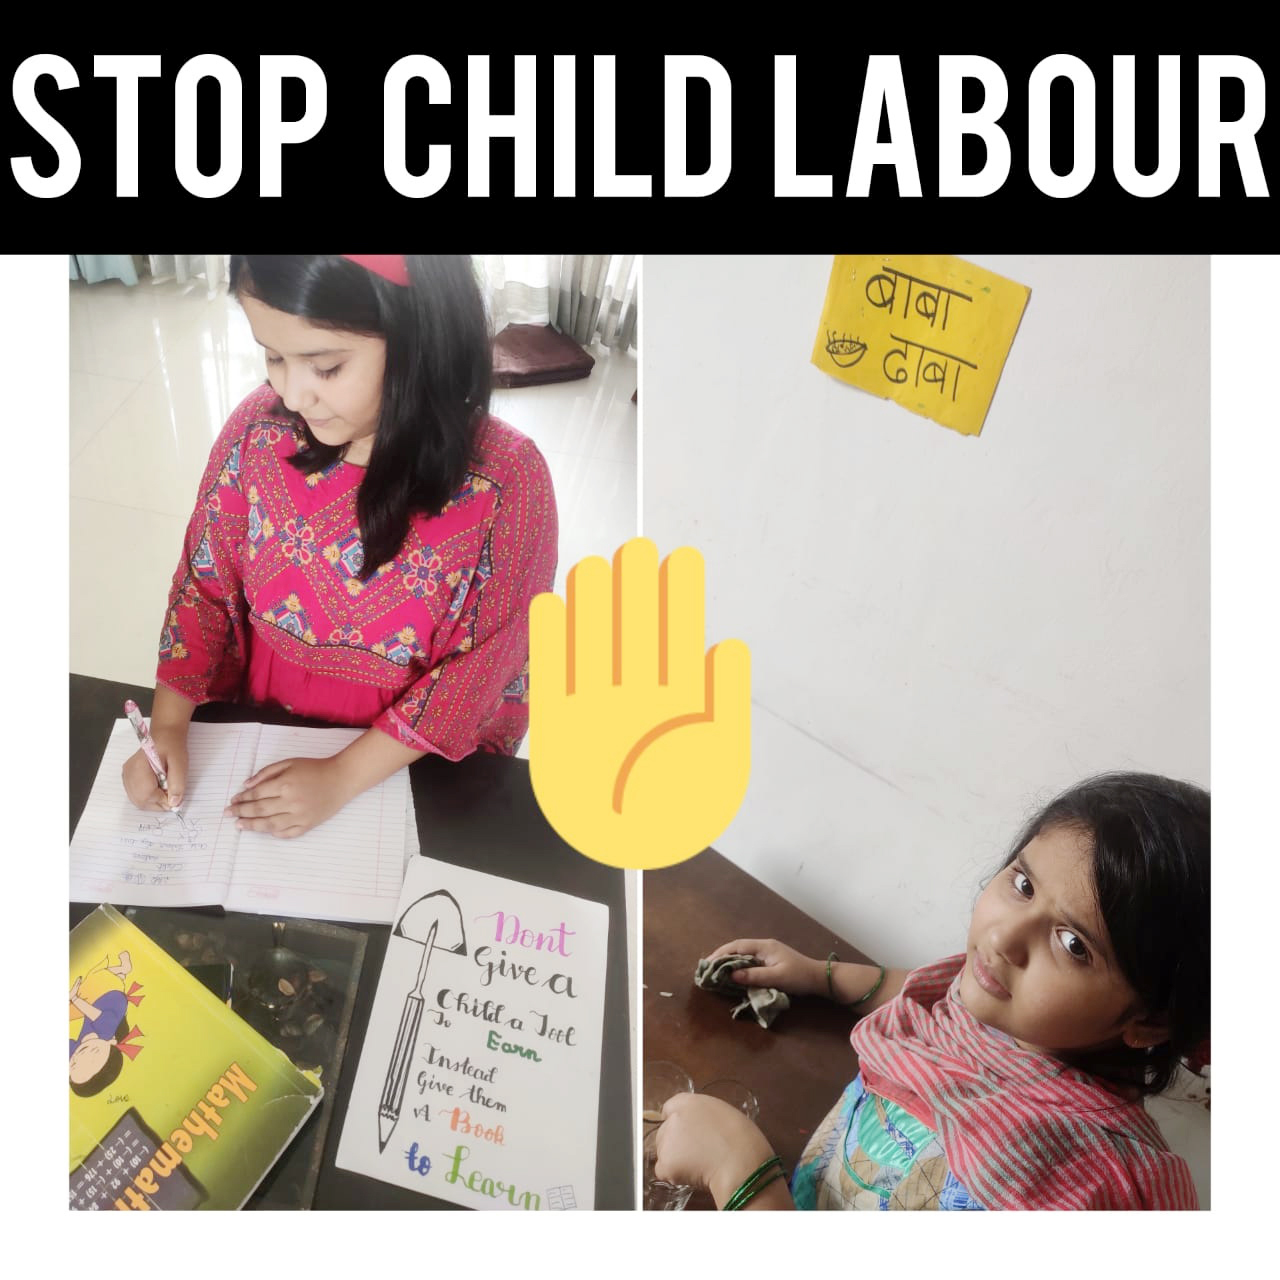 Presidium Gurgaon-57, LET’S PROTECT THE PILLARS OF OUR NATION & STOP CHILD LABOUR!